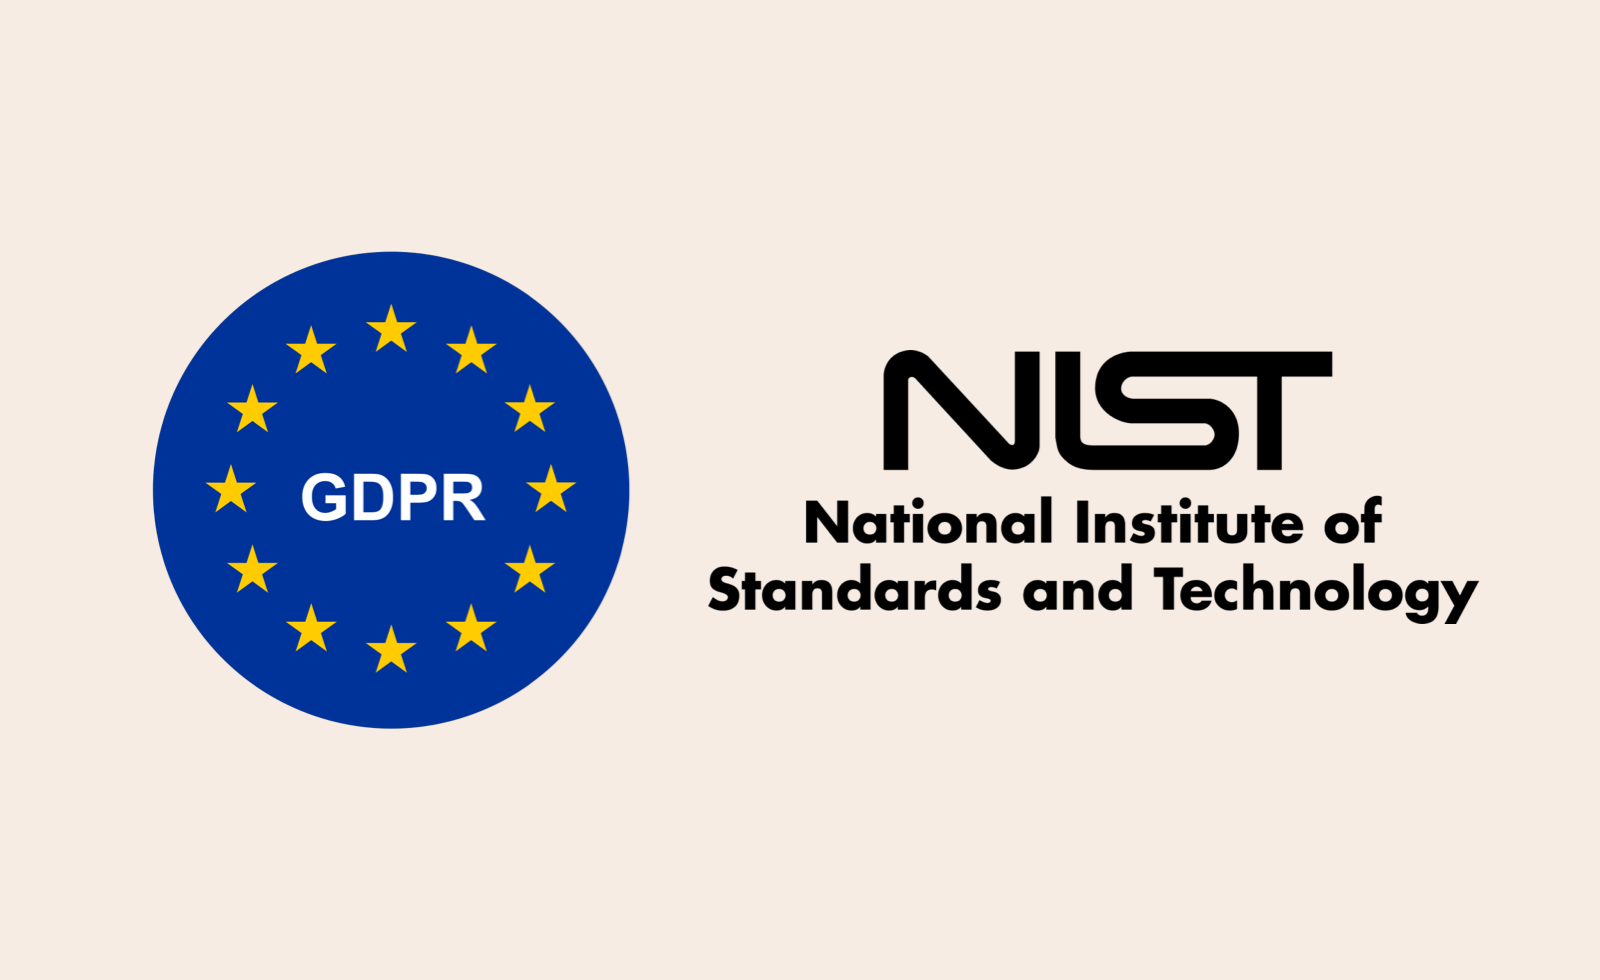 GDPR and NIST